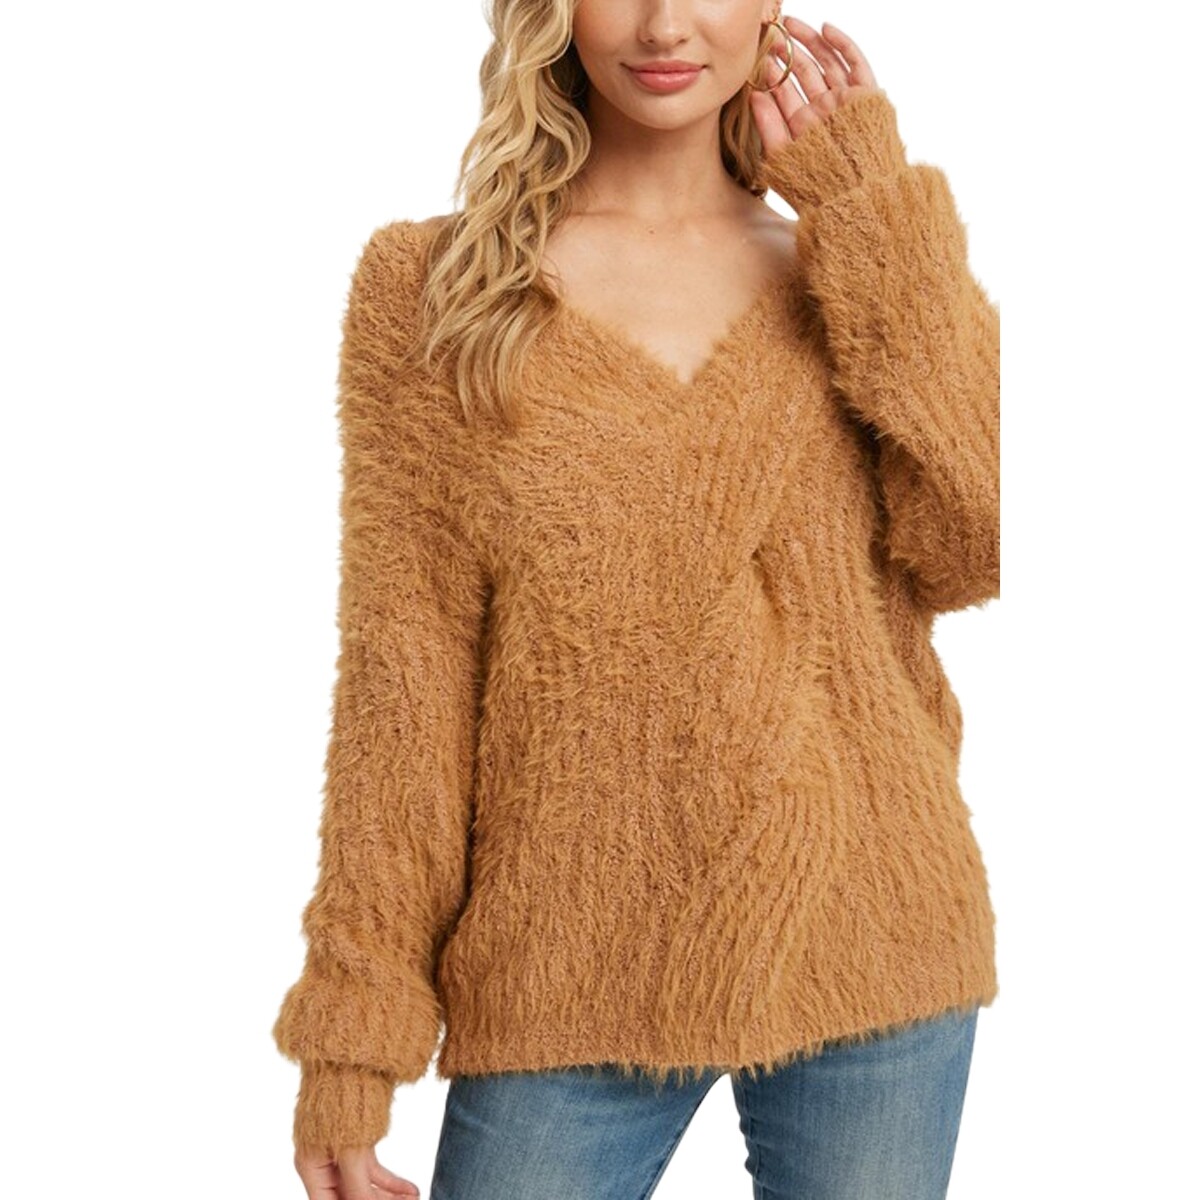 Deep V Cable Knit Sweater